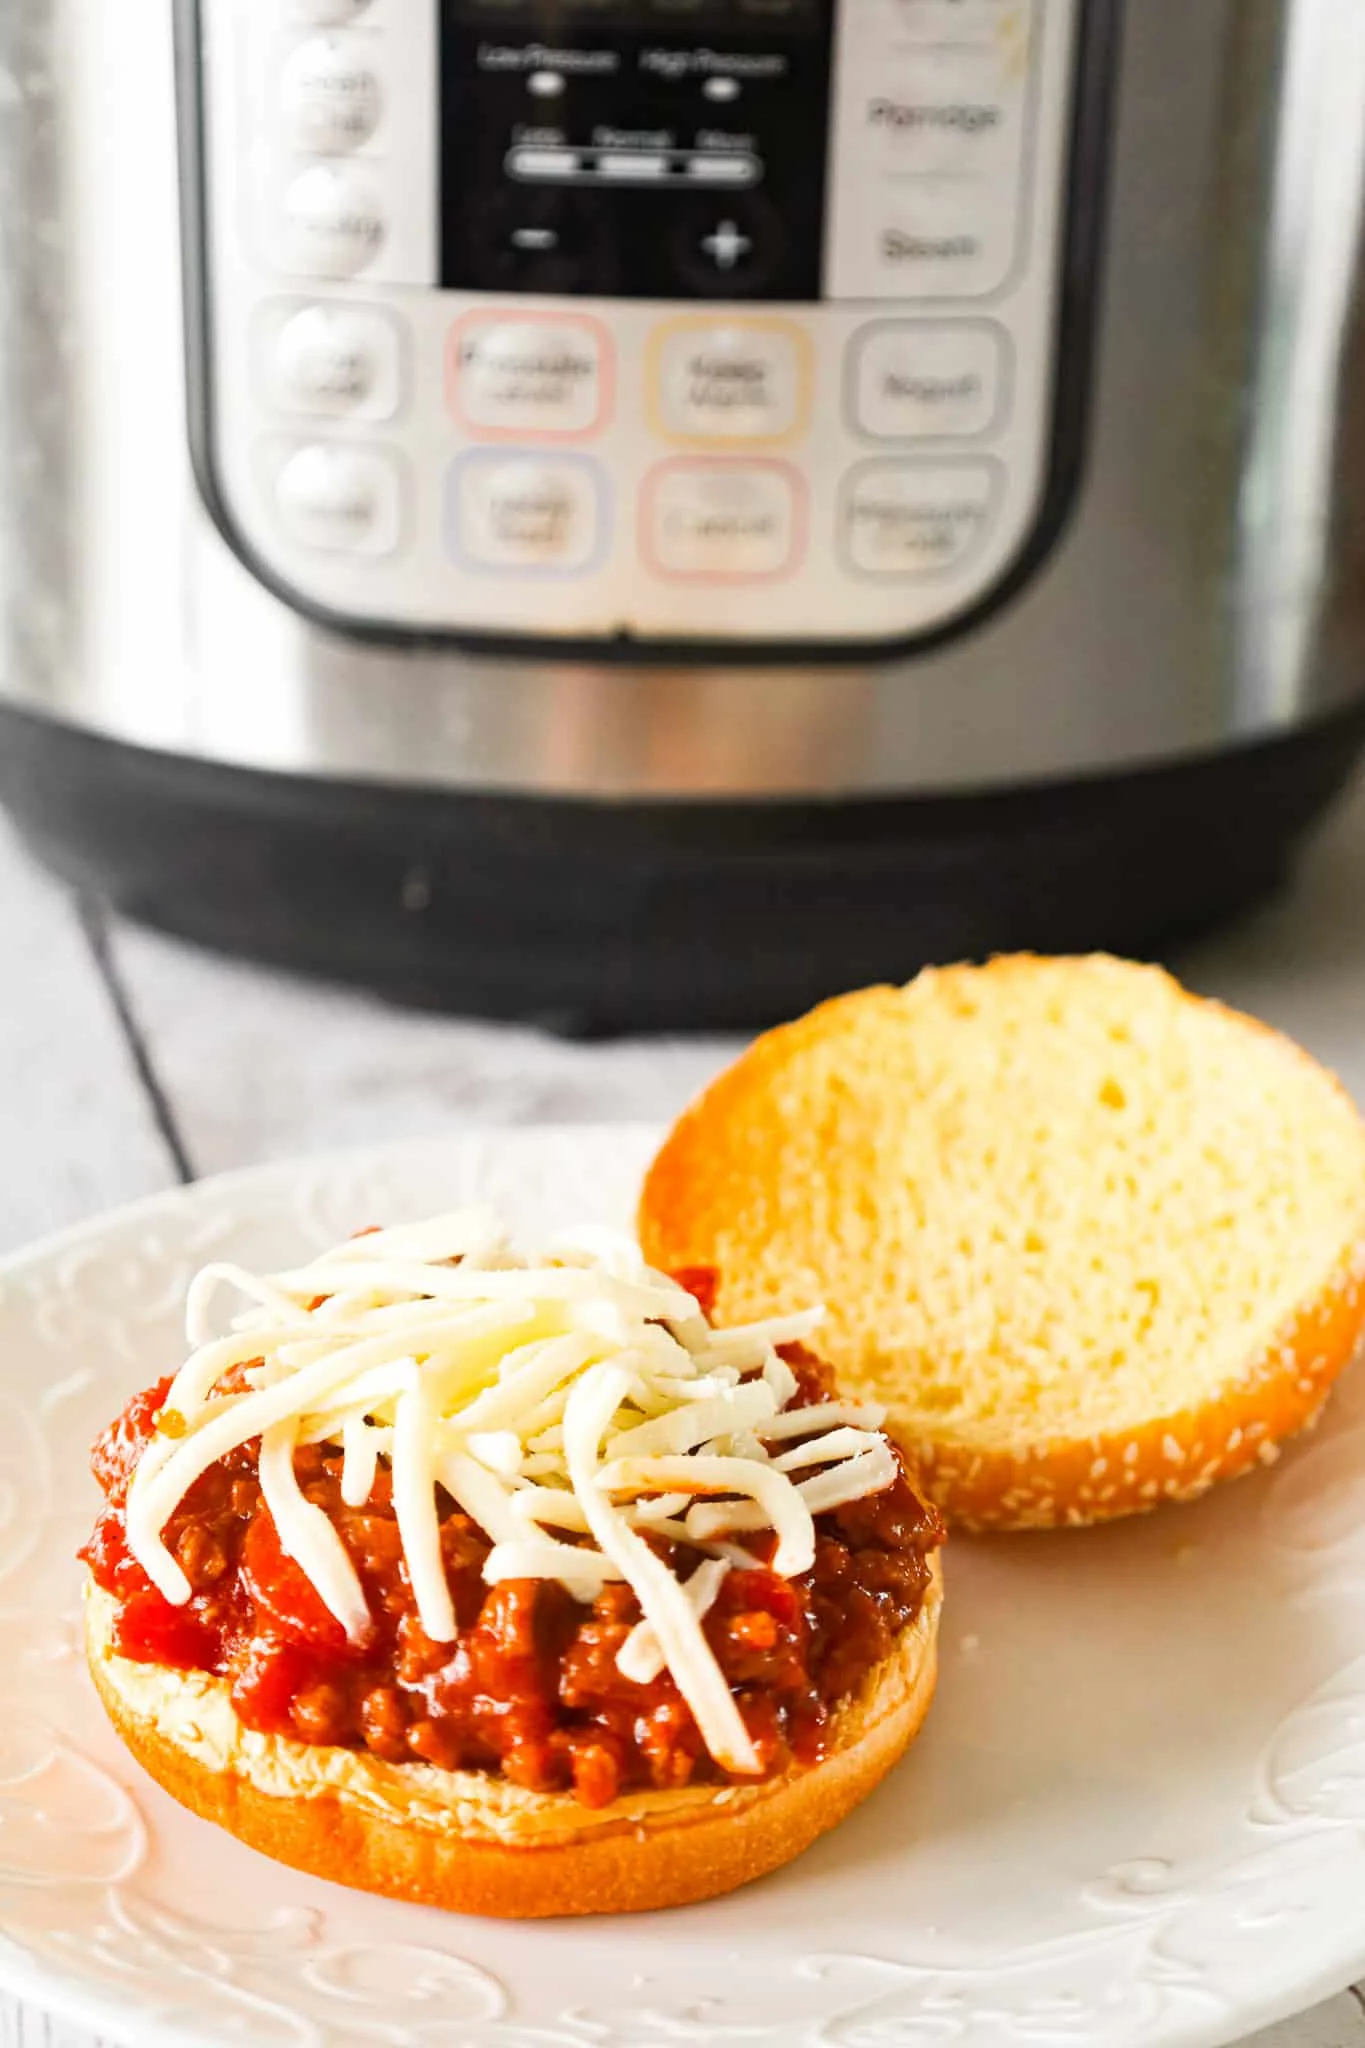 Instant Pot Sloppy Joes are an easy pressure cooker ground beef dinner recipe with a sauce made from diced tomatoes, ketchup, Worcestershire sauce and spices.